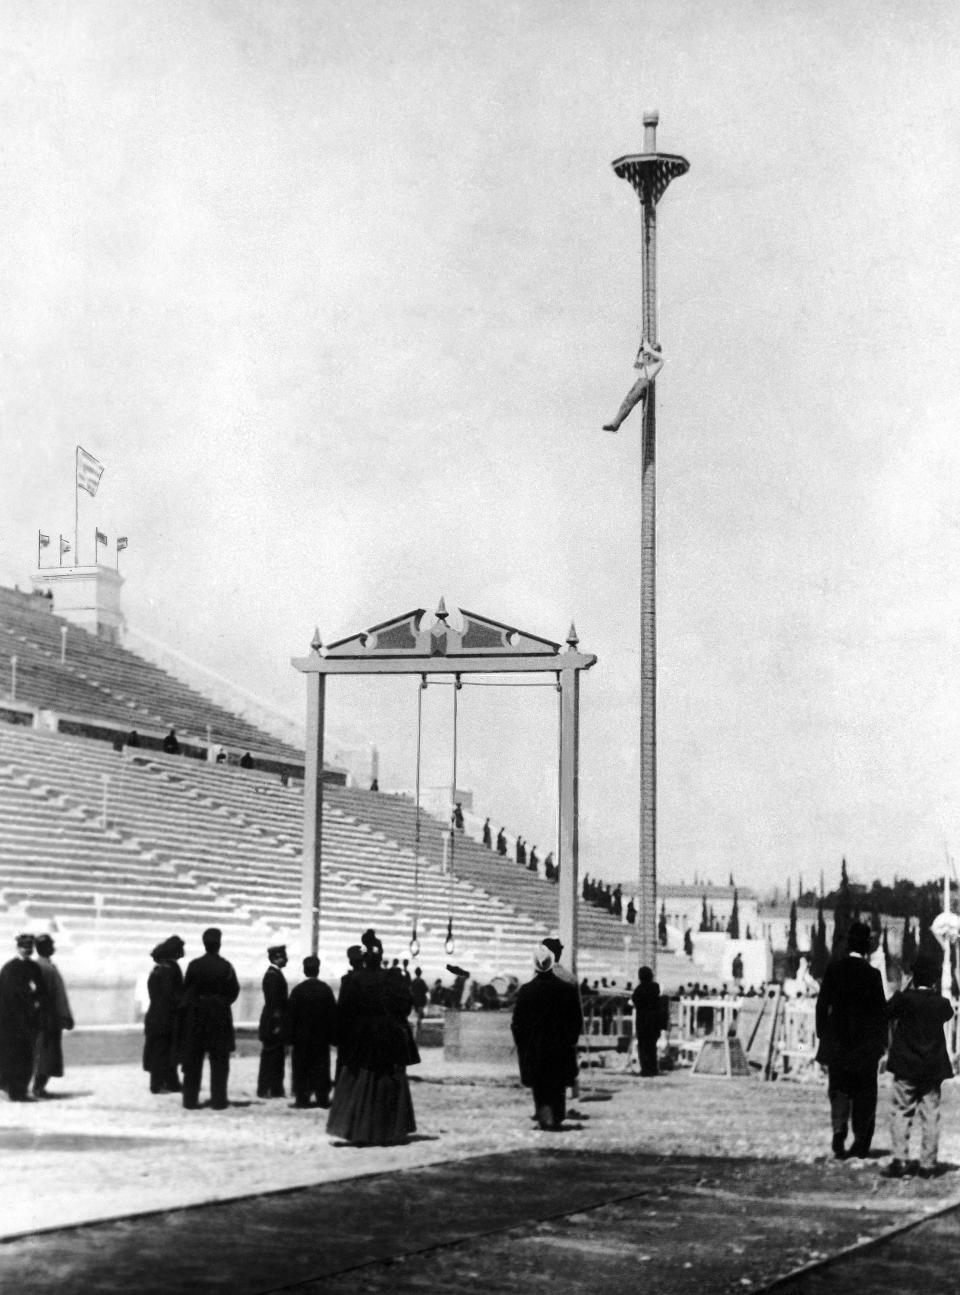 <p>The inaugural rope climb in 1896 boasted a 49-foot scale to the top. The length was cut to 25-feet in 1900, since only two athletes reached the the goal in the previous program. </p>